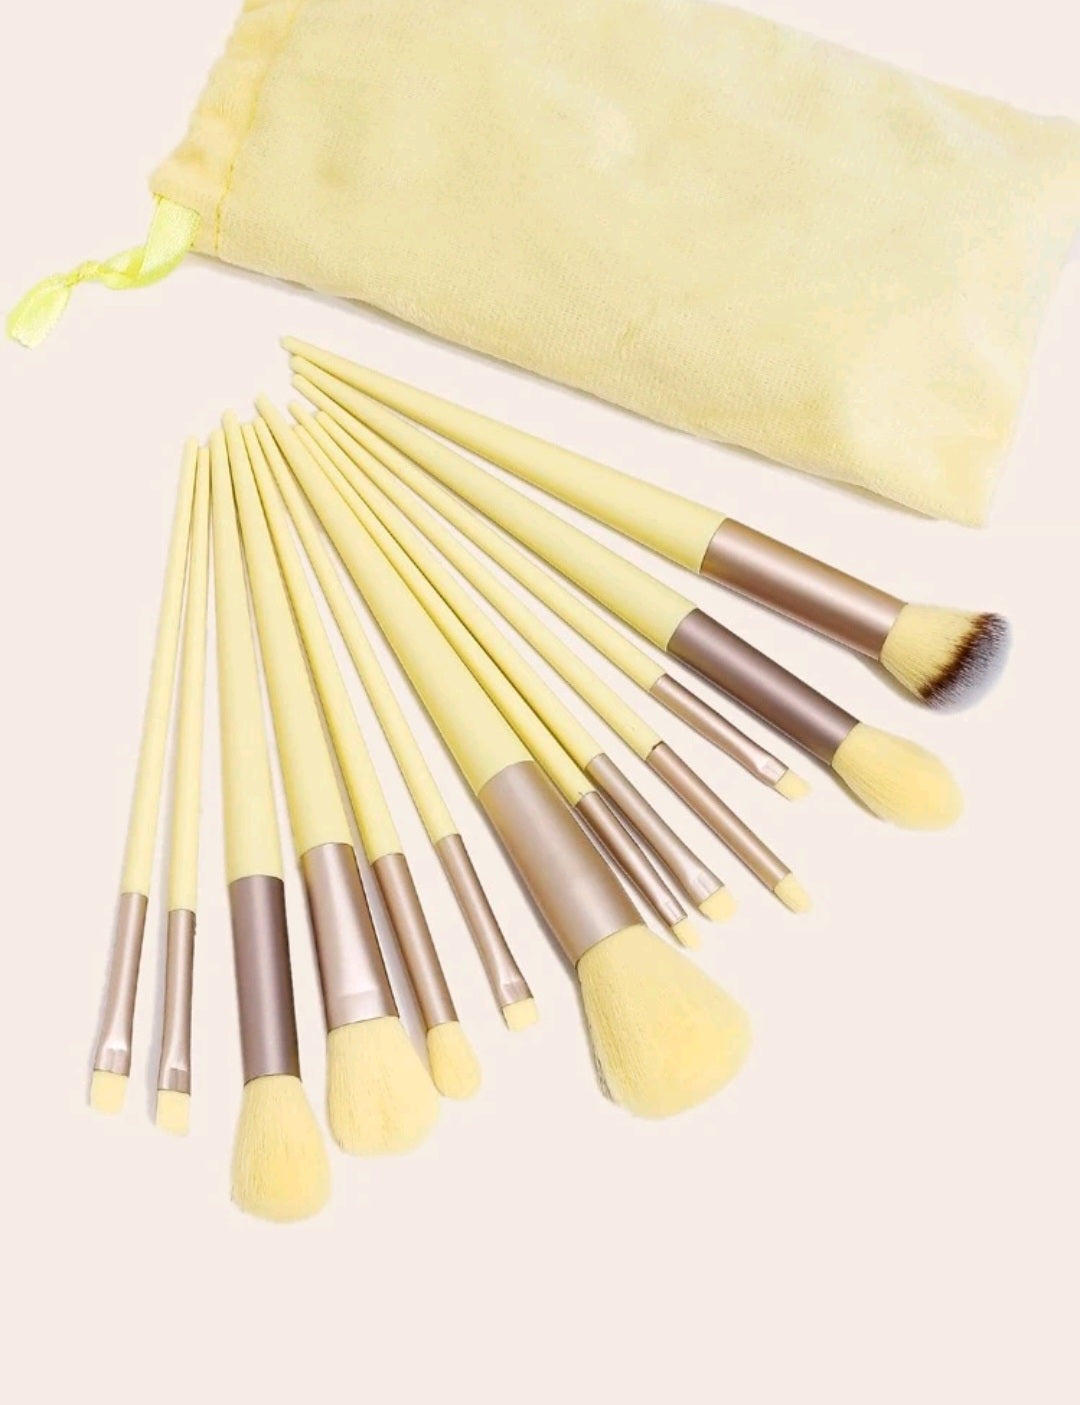 13 Pieces Makeup Brush Sets With Bag, Soft Fluffy Synthetic Professional Makeup Brushe Sets for Cosmetics Foundation Blush Powder Eyeshadow Blending Makeup Brush Beauty Tool - SANDY'S MAKEUP AND ARTISTRY 